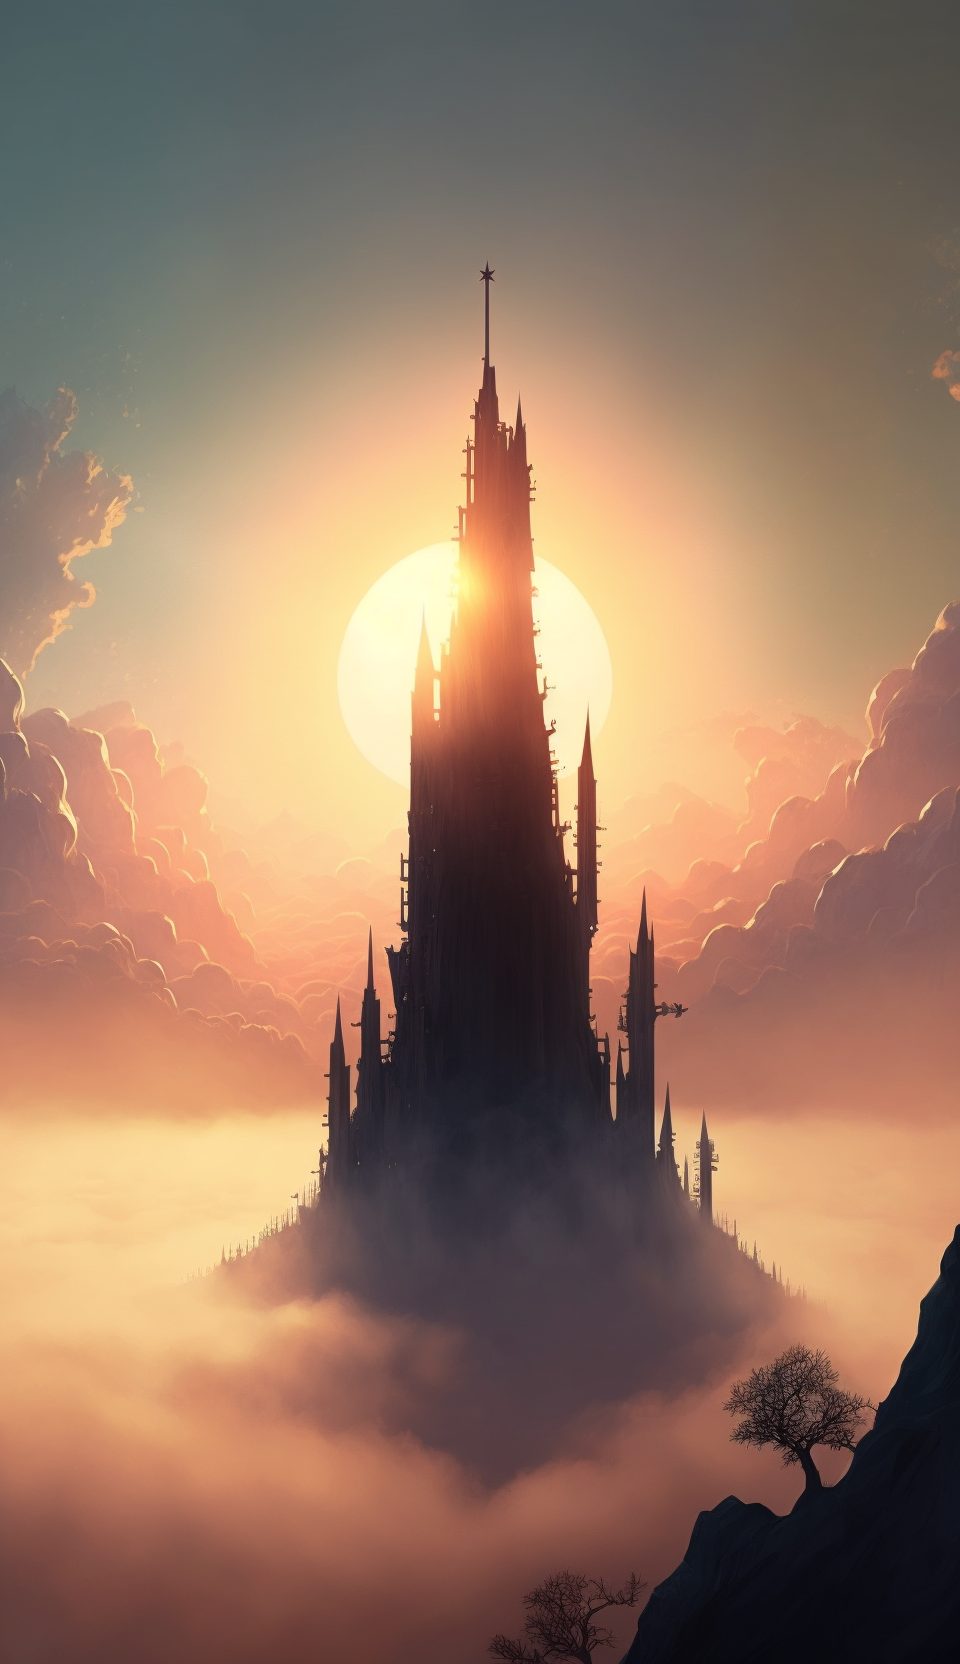 Frank3D castle spire poking out above the clouds bright sun ris 02acf43b 0964 4a66 a41c 5e85364640ca